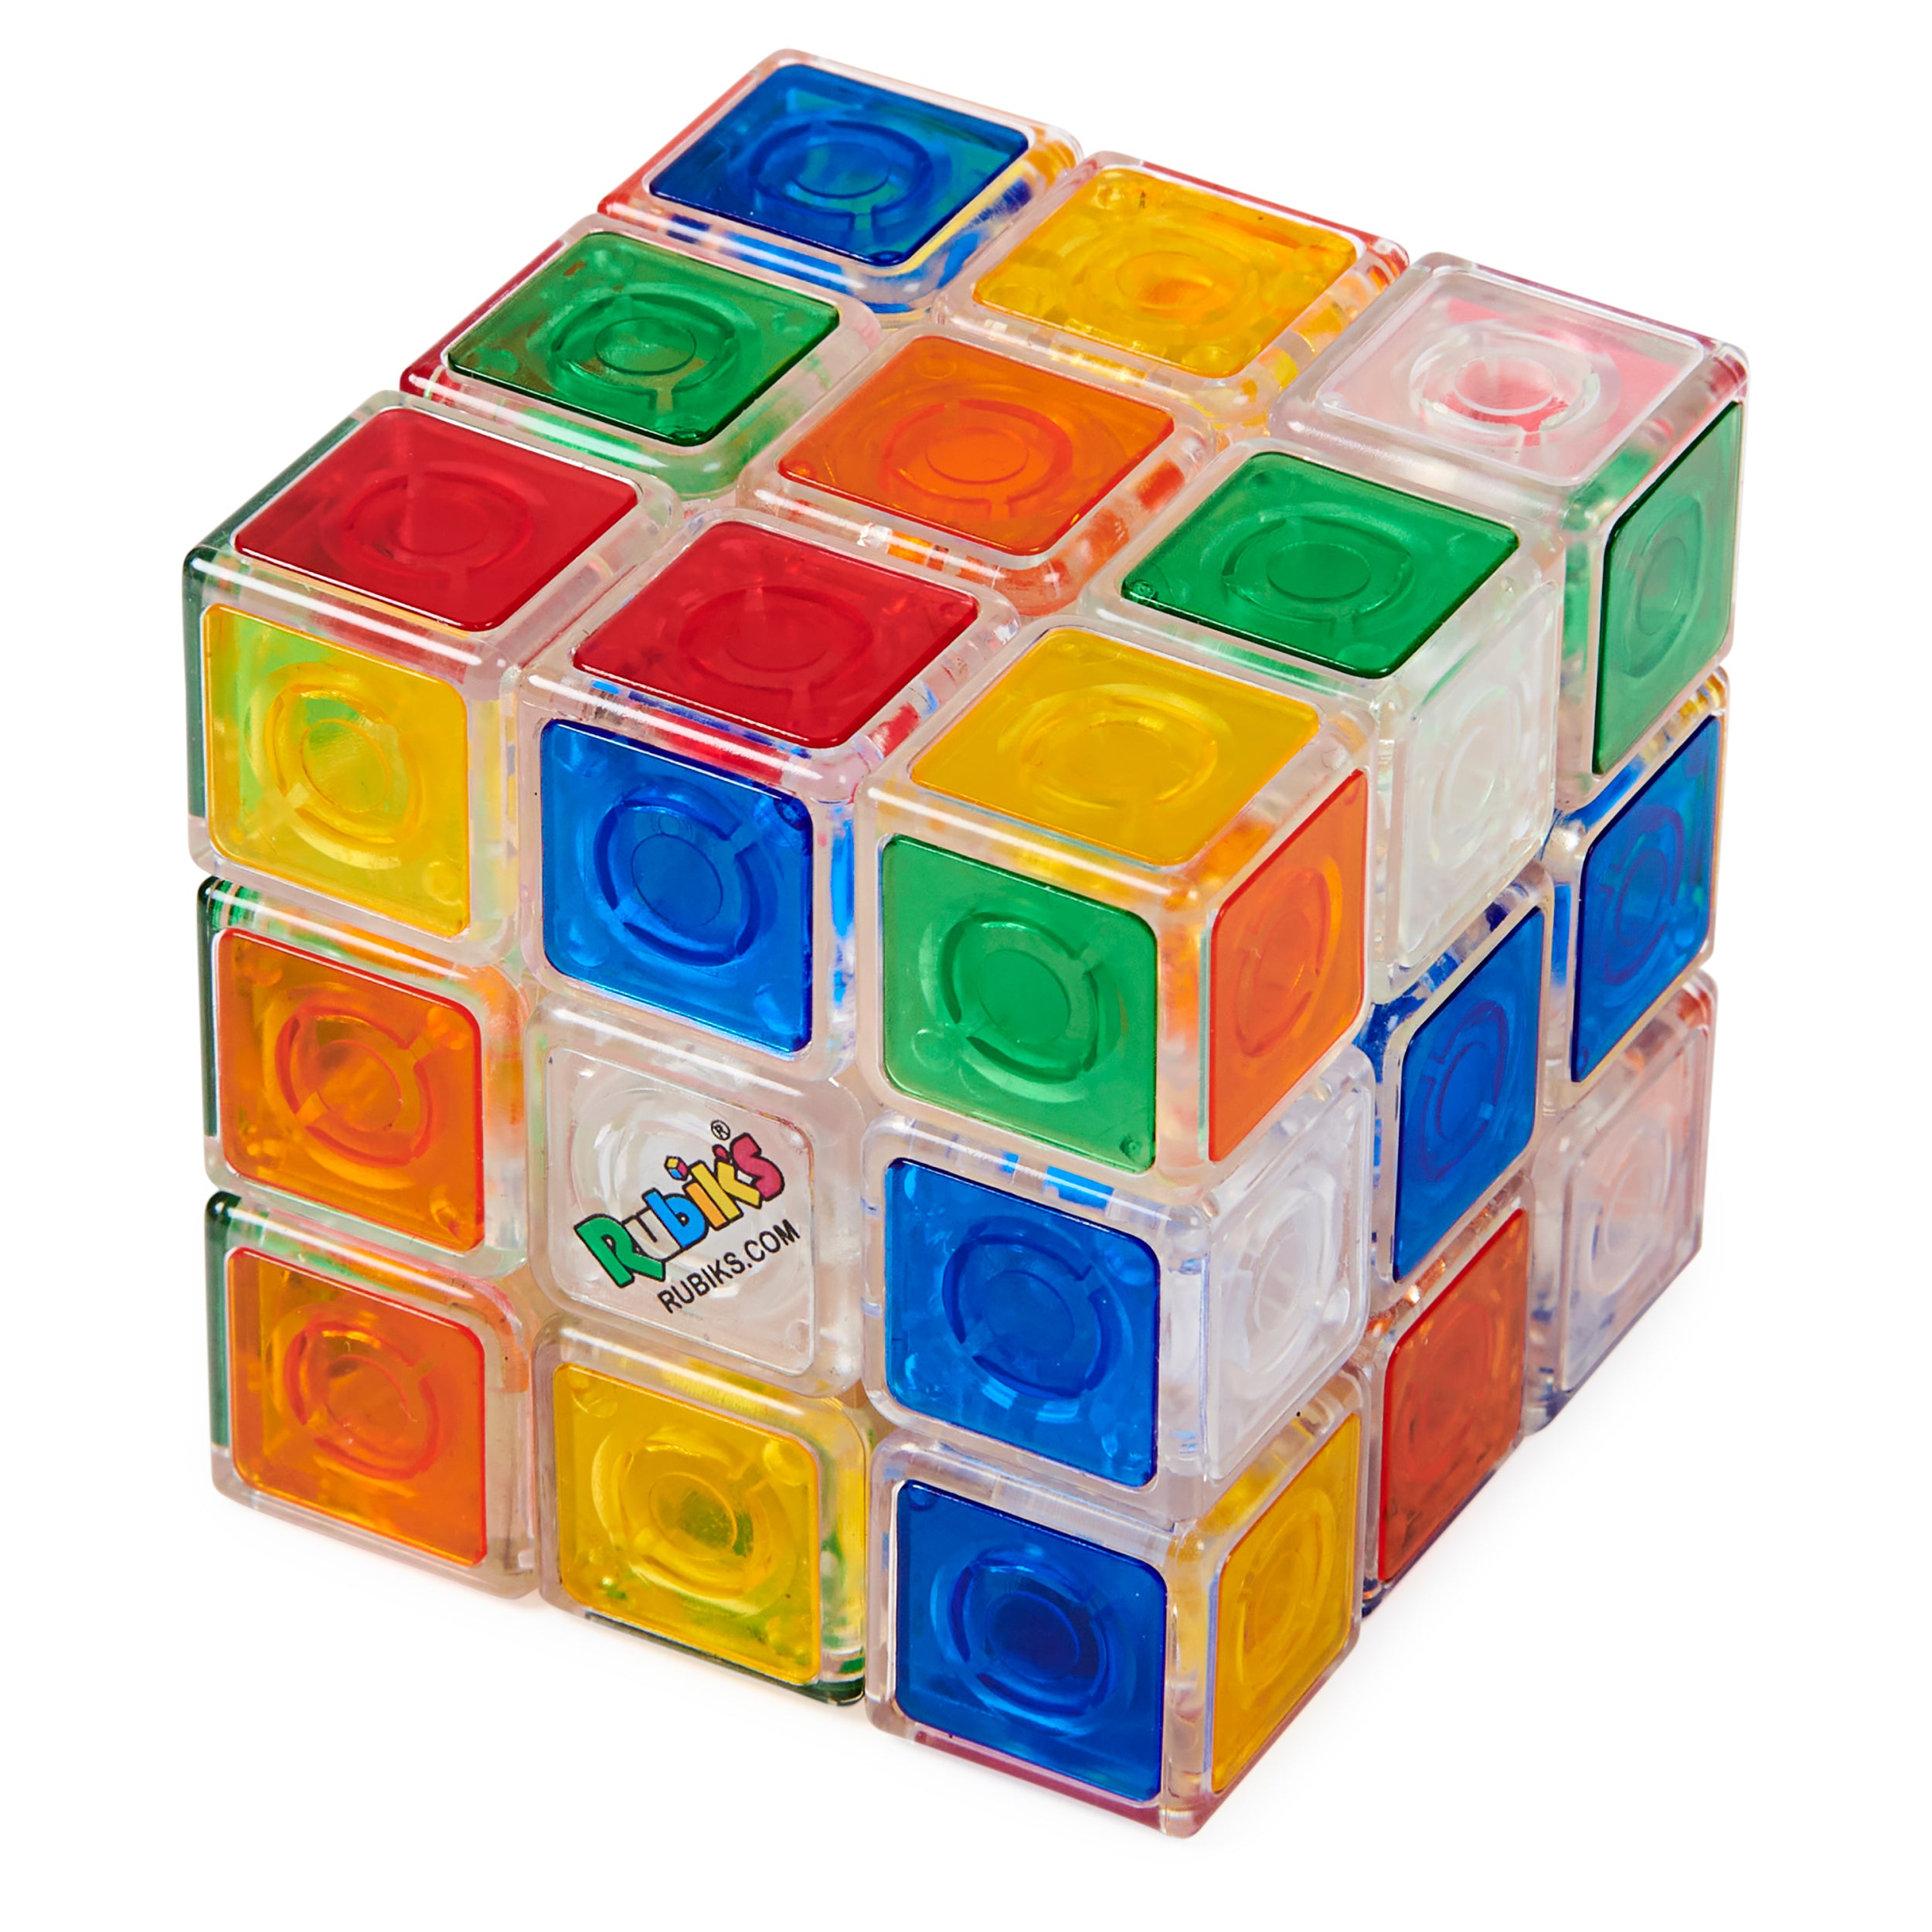 Rubik's Crystal, New Transparent 3x3 Cube Classic Color-Matching